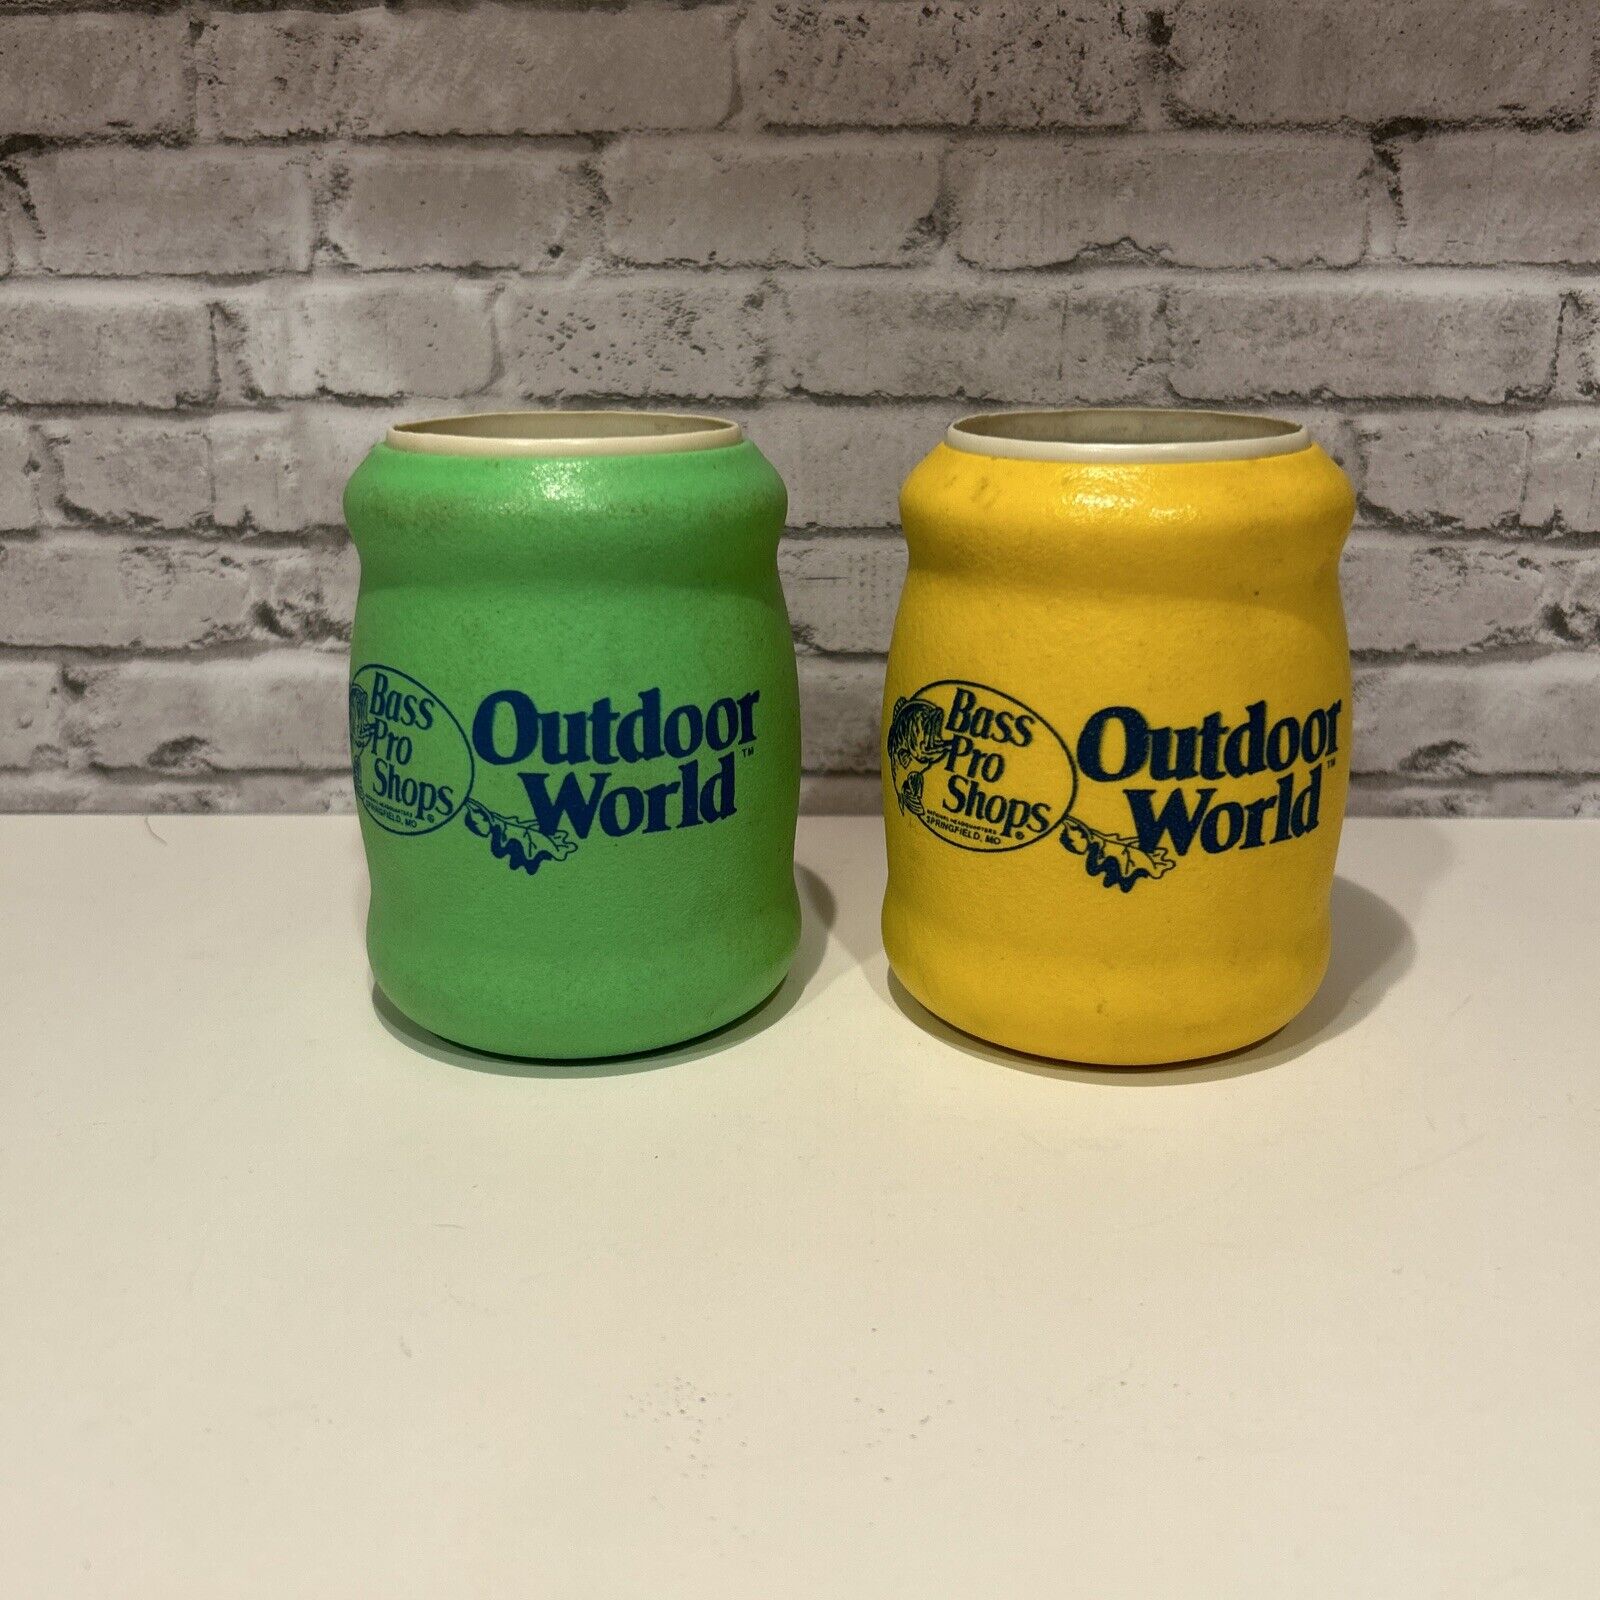 2 Vintage Coleman Tuffoams Bass Pro Shops Outdoor World Can Koozies